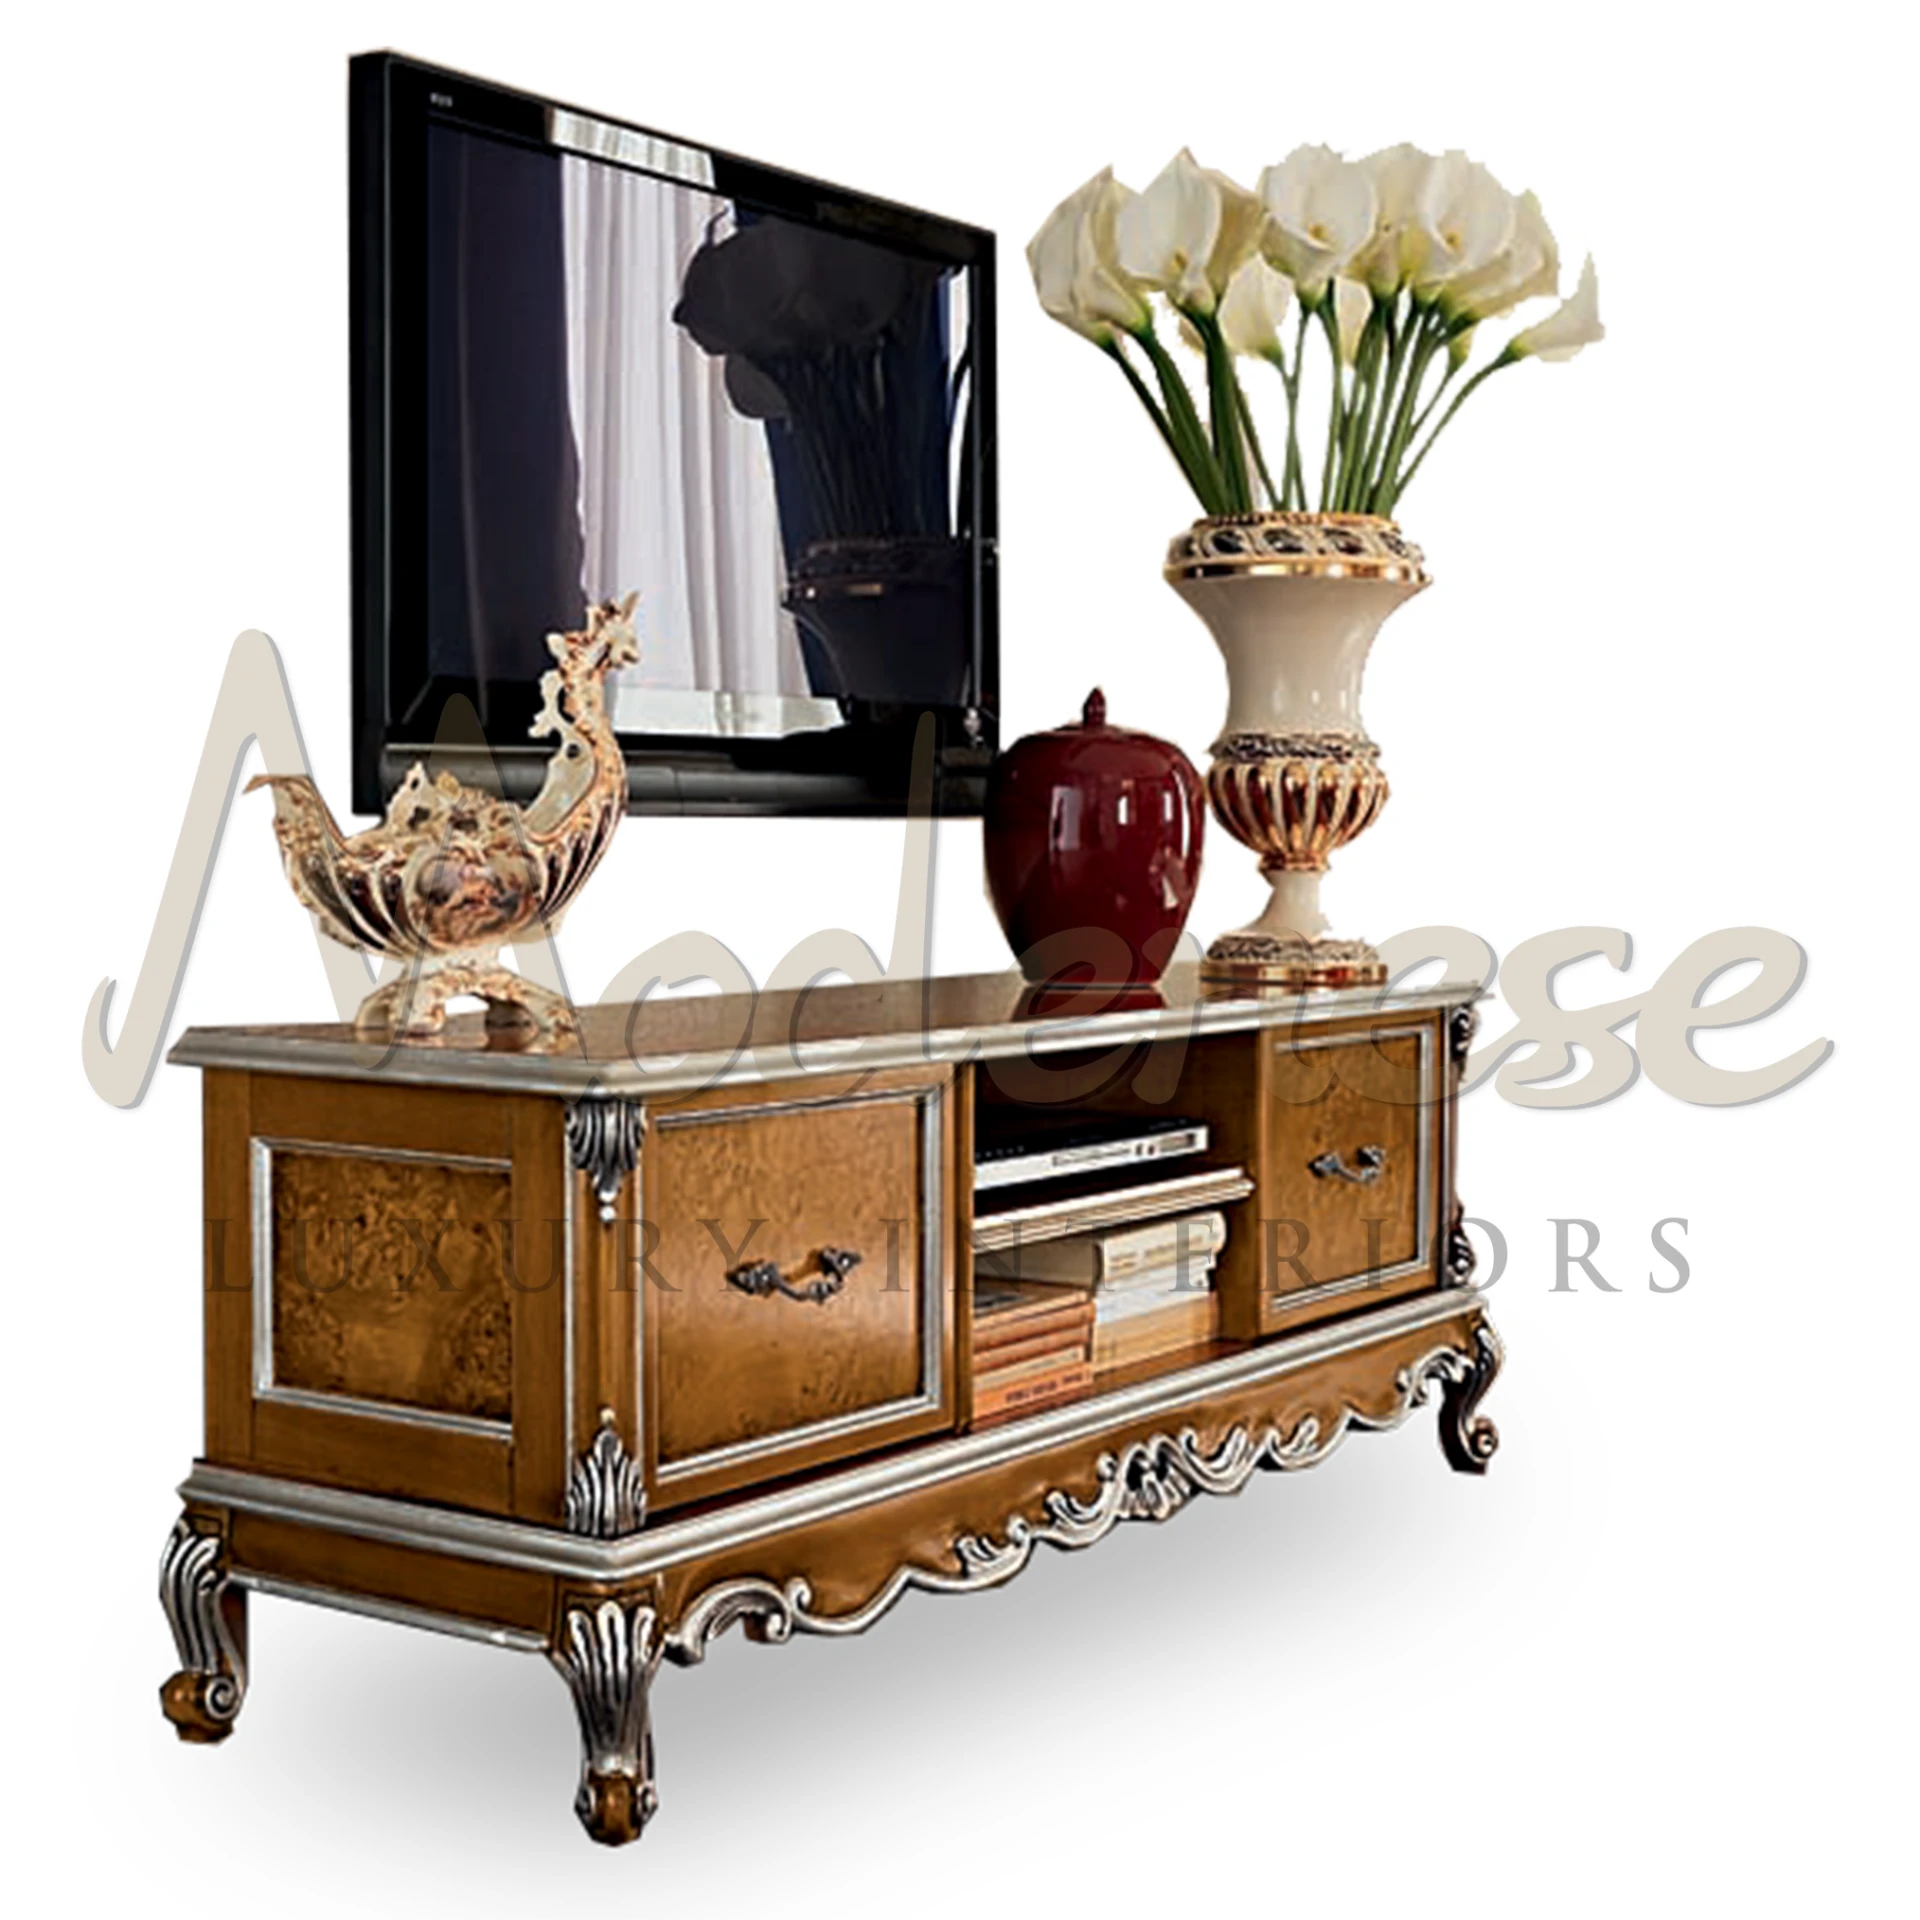 Modern Classic TV Stand by Modenese, solid wood with luxury inlay, showcasing Italian design for upscale interiors.
